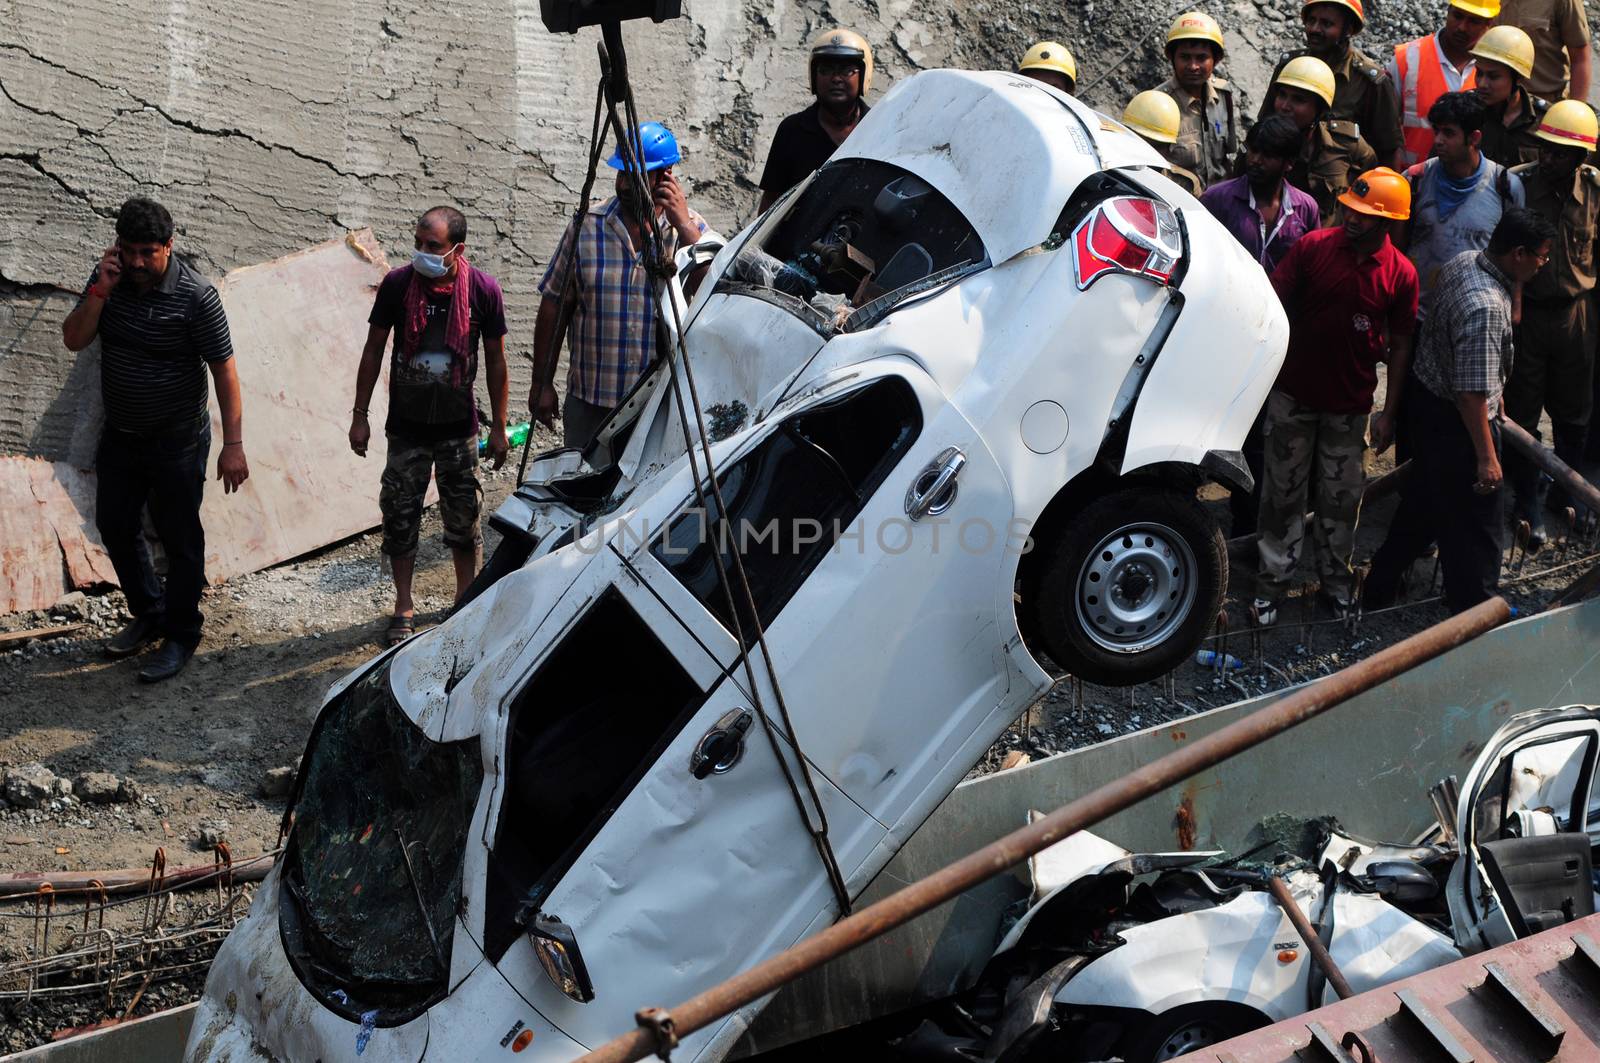 INDIA, Kolkata: Indian rescue workers and volunteers try to free people trapped under the wreckage of a collapsed flyover bridge in Kolkata on March 31, 2016. At least 14 people were killed and dozens more injured when a flyover collapsed in a busy Indian city on March 31, an official said, as emergency workers battled to rescue people trapped under the rubble.